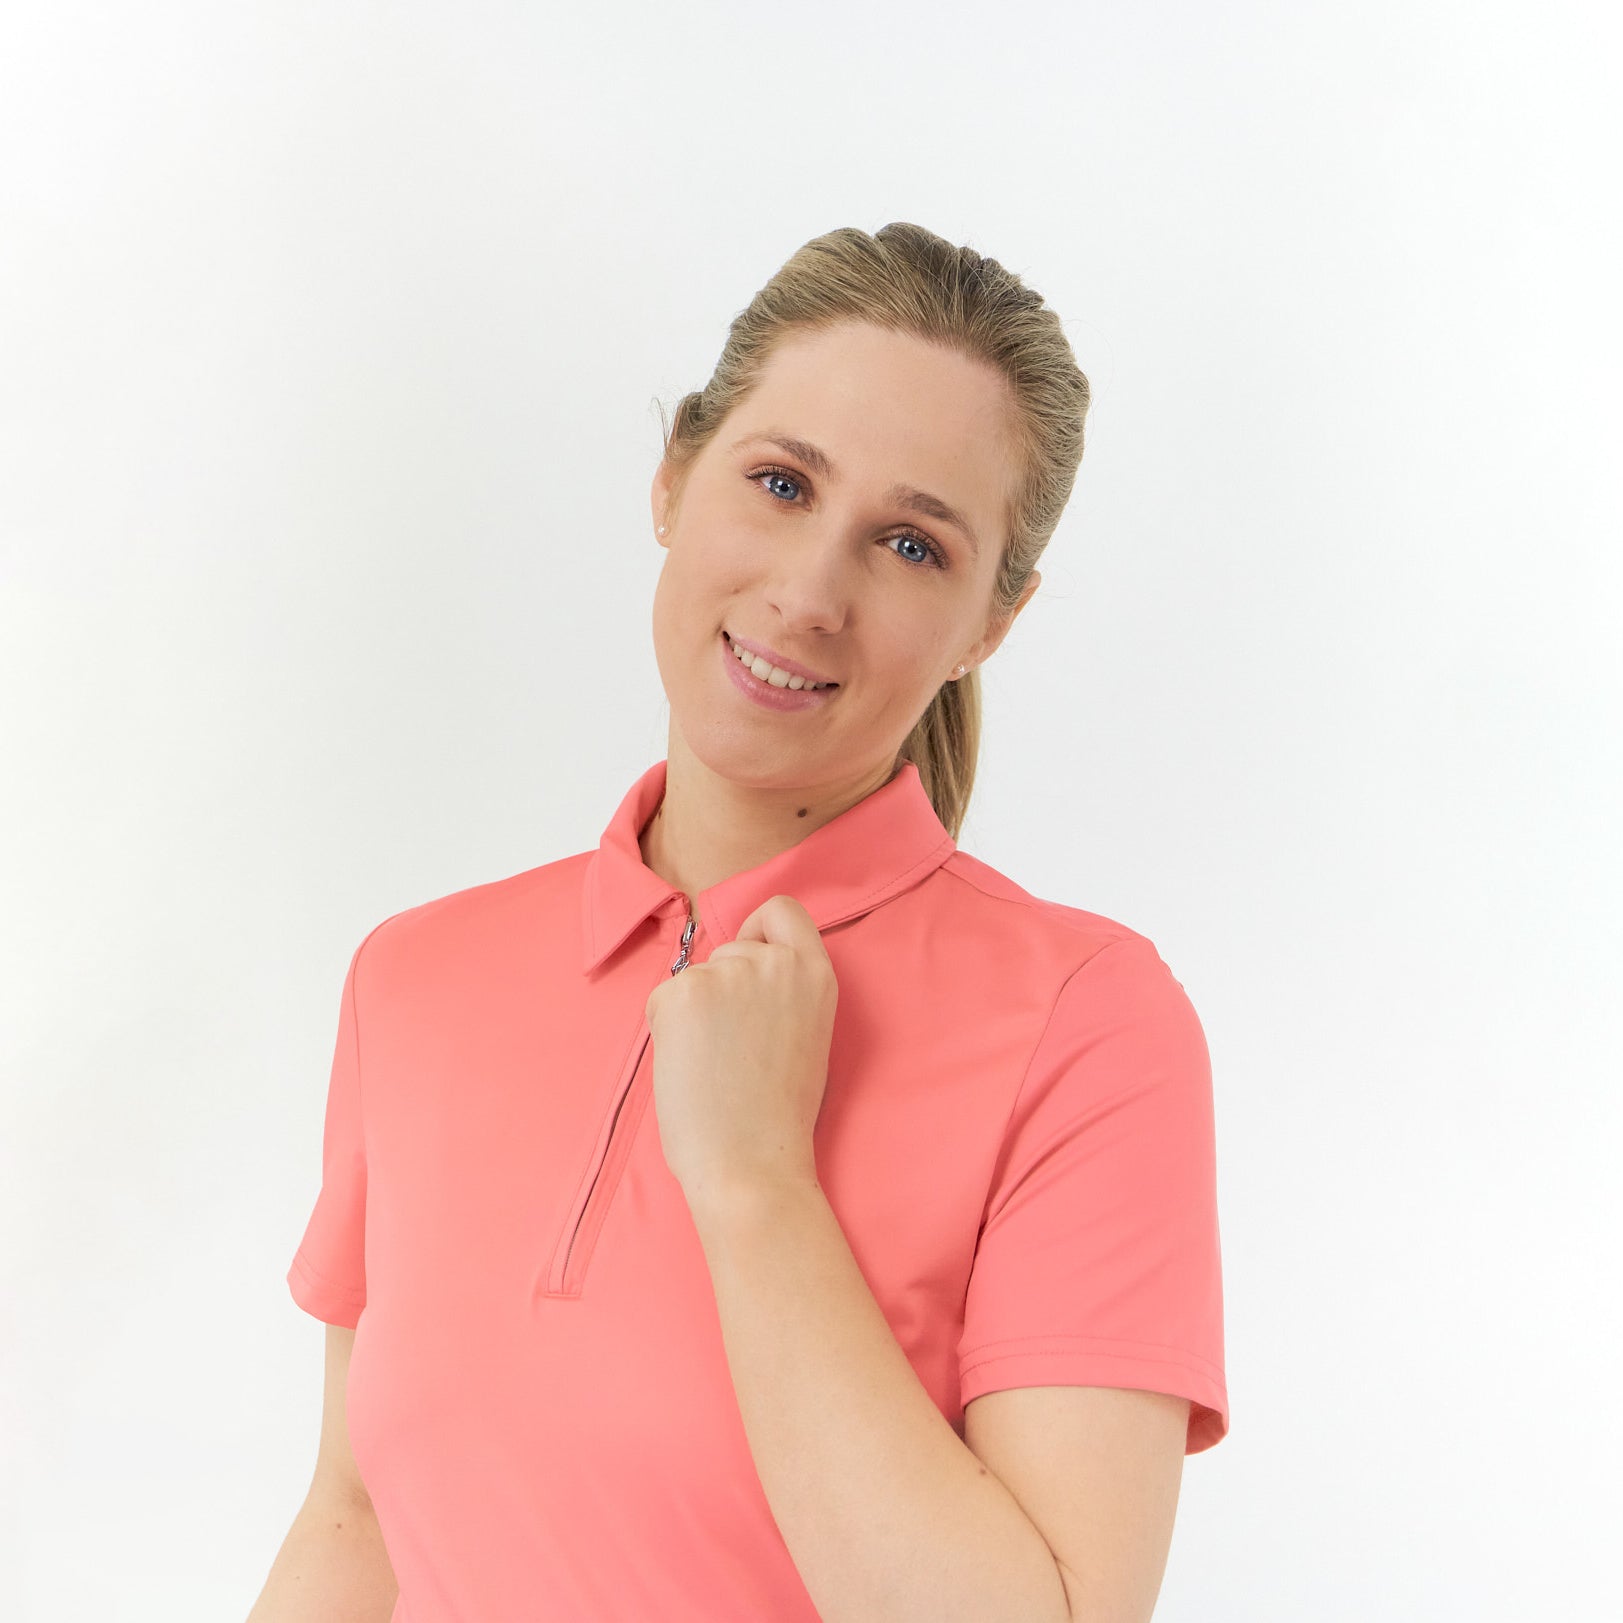 Pure Golf Ladies Cap Sleeve Polo in Coral